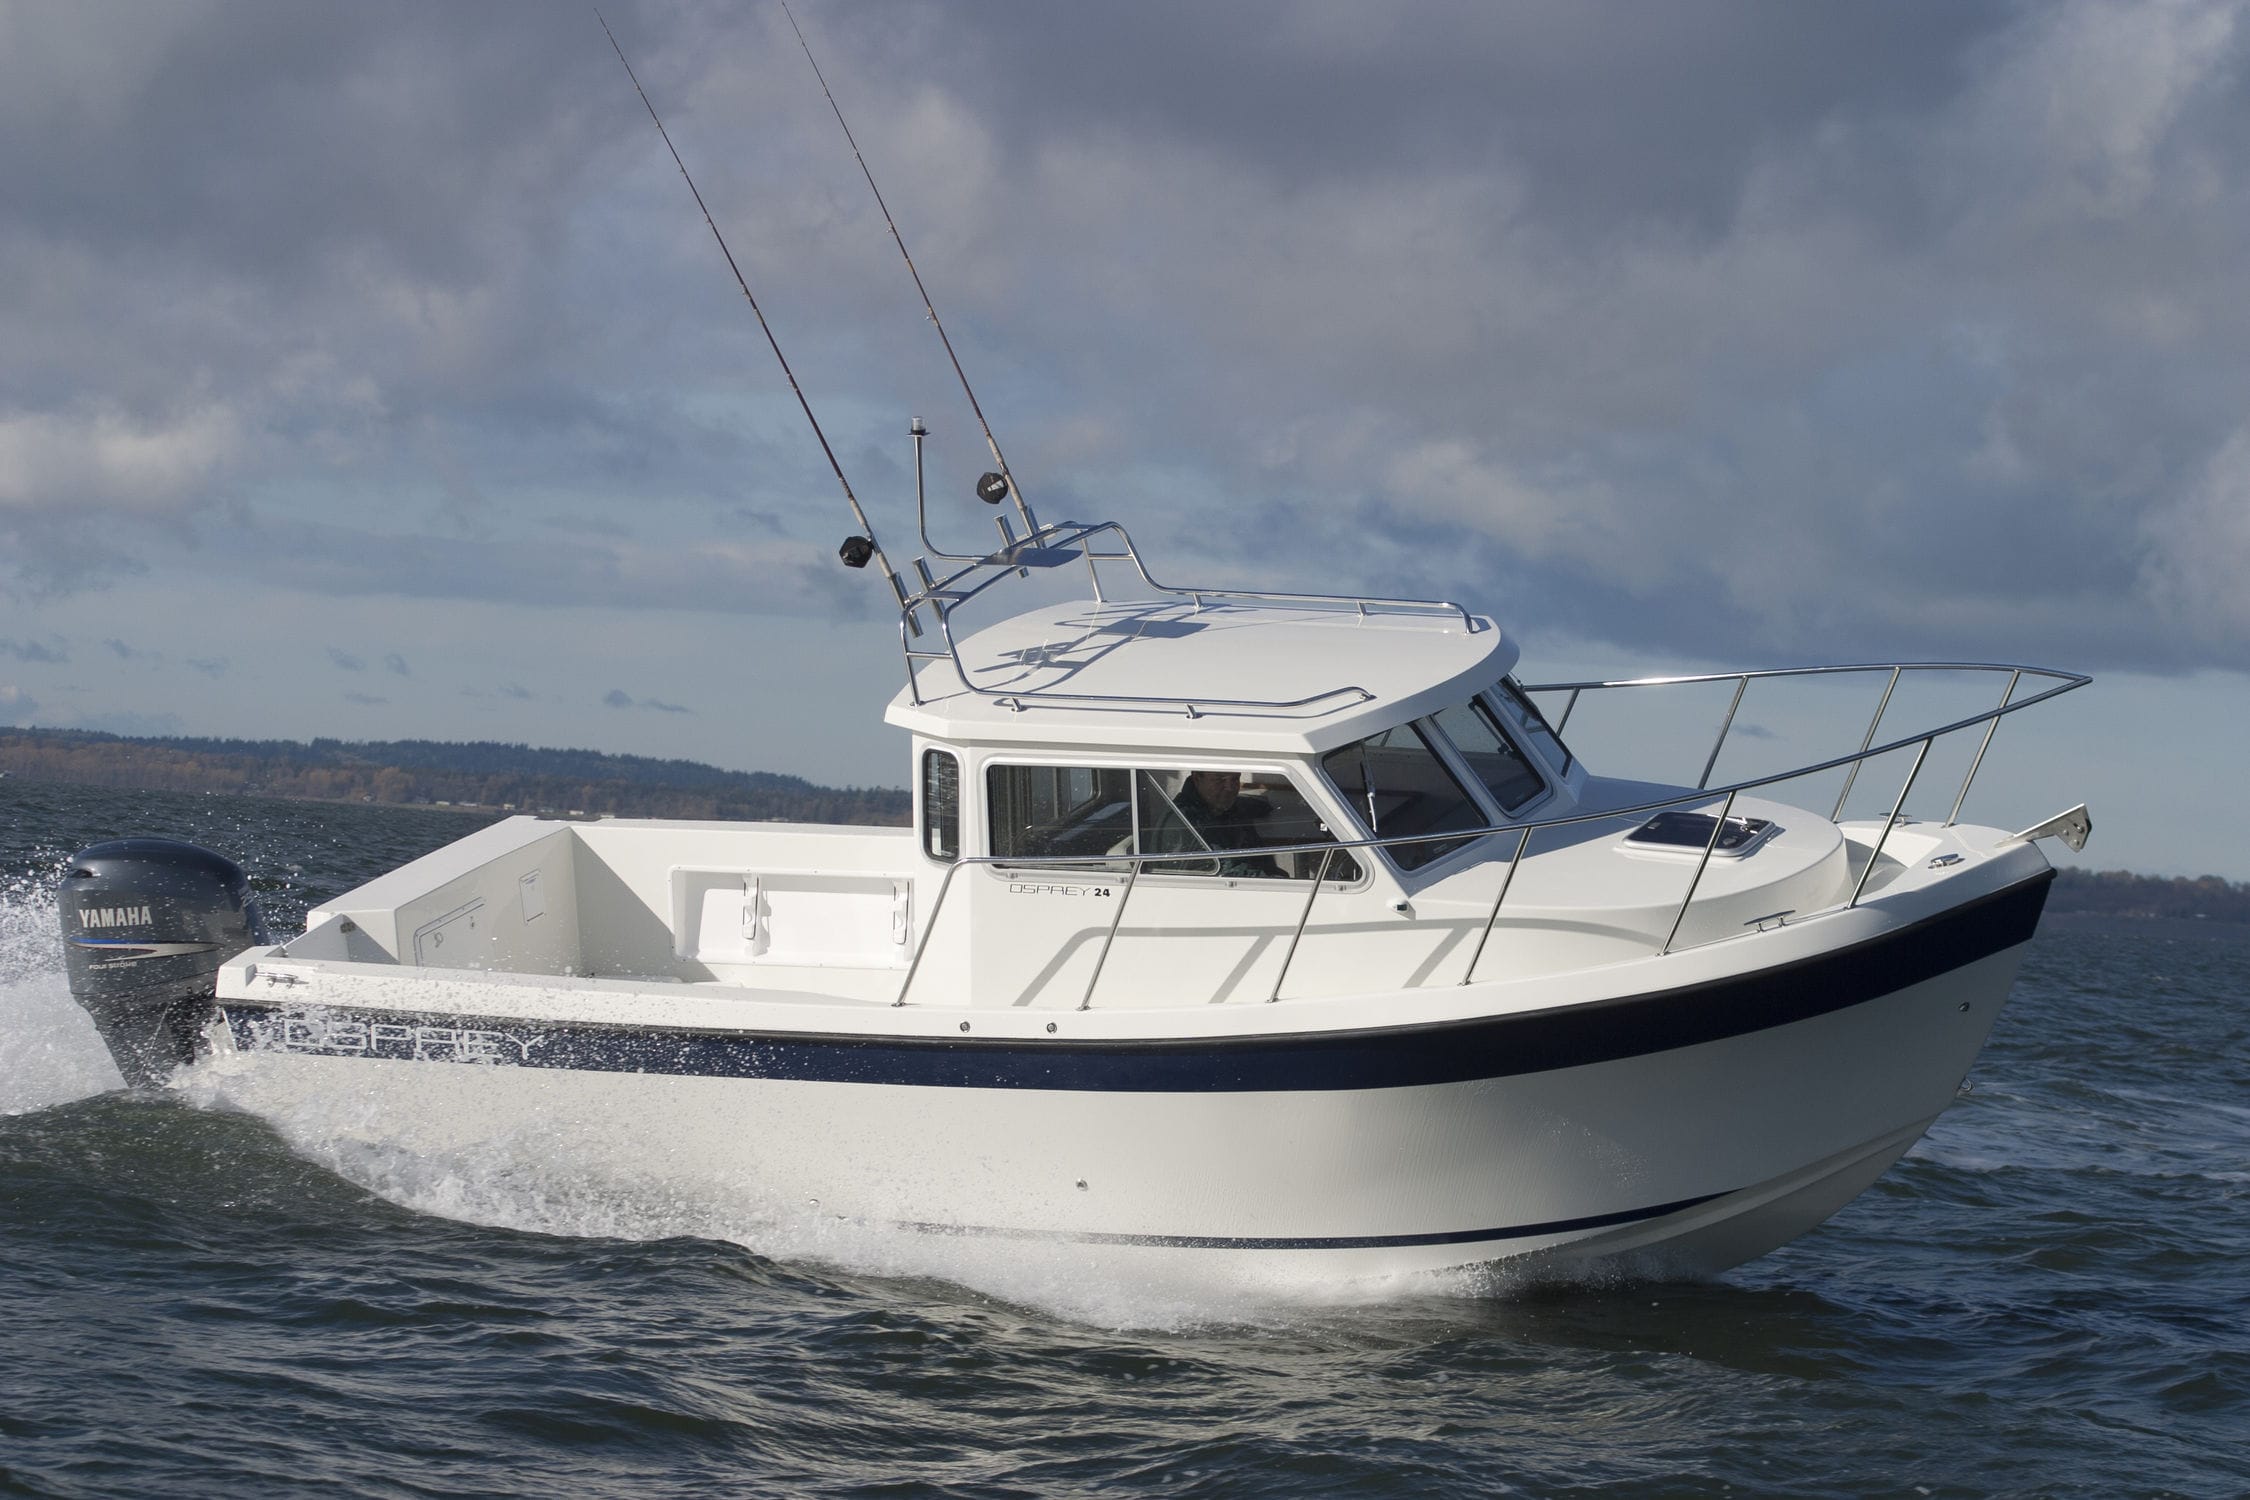 Outboard day fishing boat - 24 FISHERMAN - Osprey Pilothouse Boats